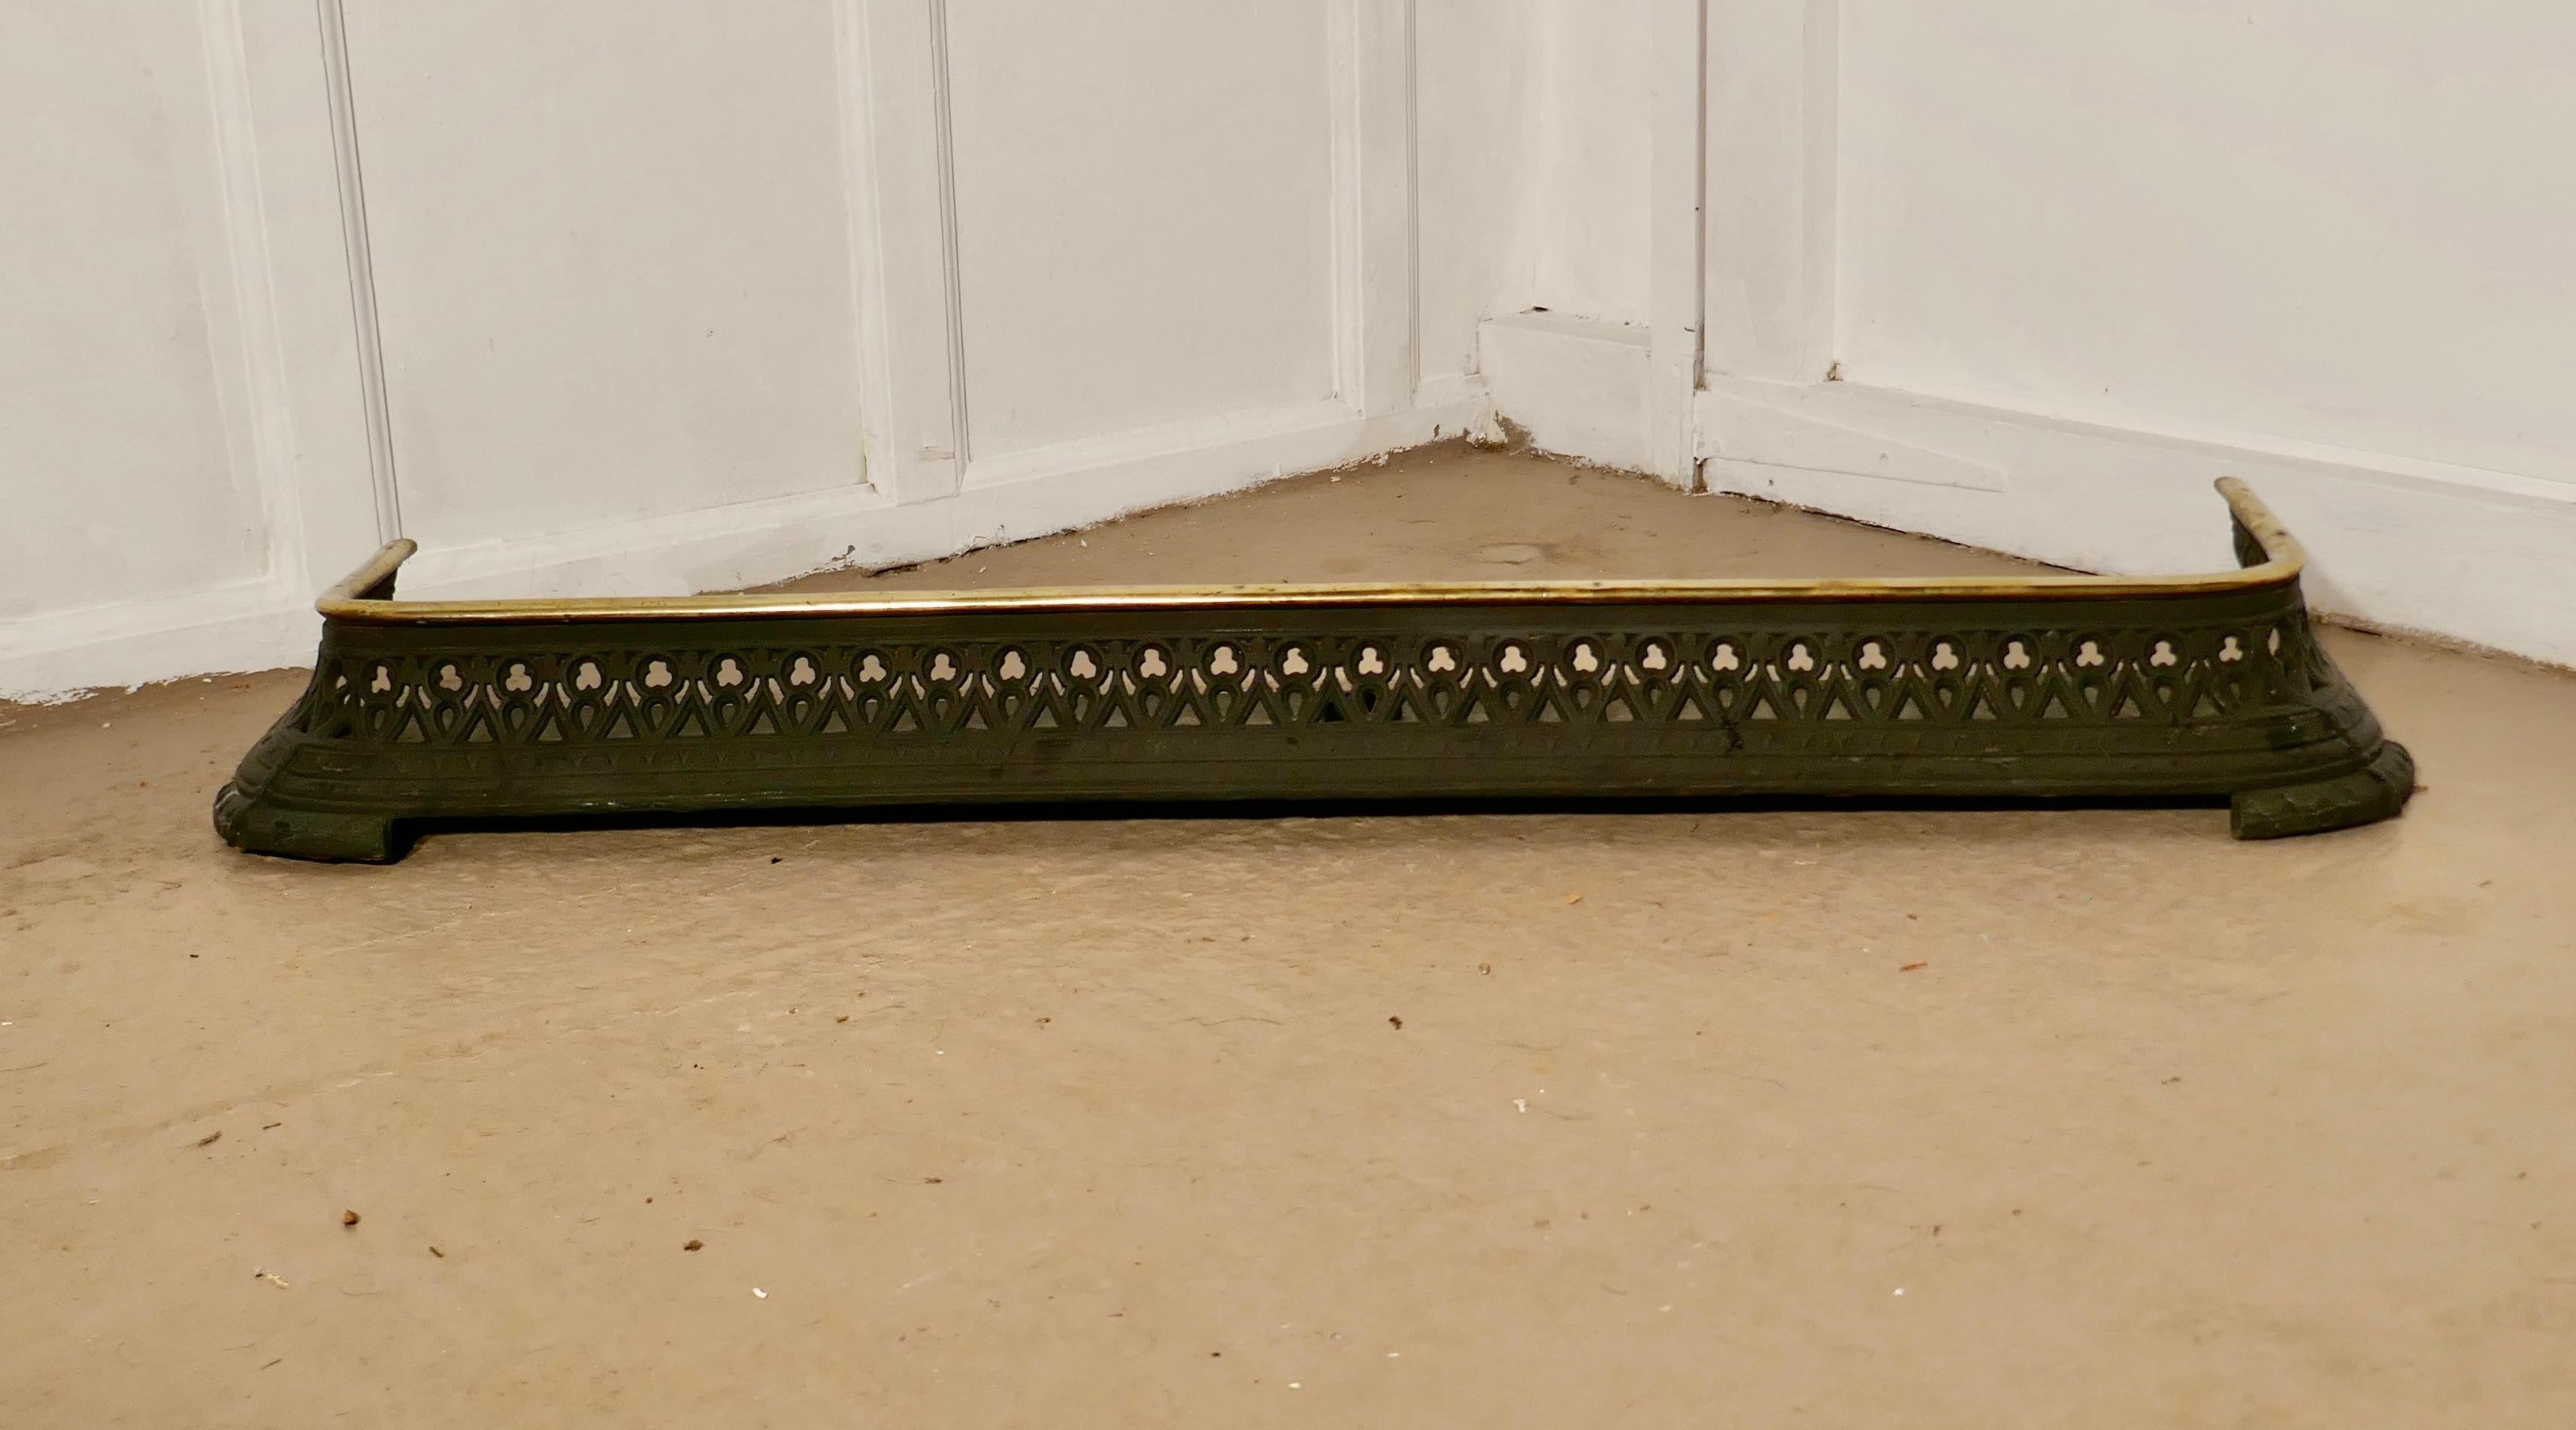 Arts & Crafts Victorian heavy brass and iron fender

This is a very heavy Victorian Fender, the fender has decorative heavy Iron base with a brass rail on the top
 
The fender is in good round condition
The fender is 5” high, 12” deep and 46”